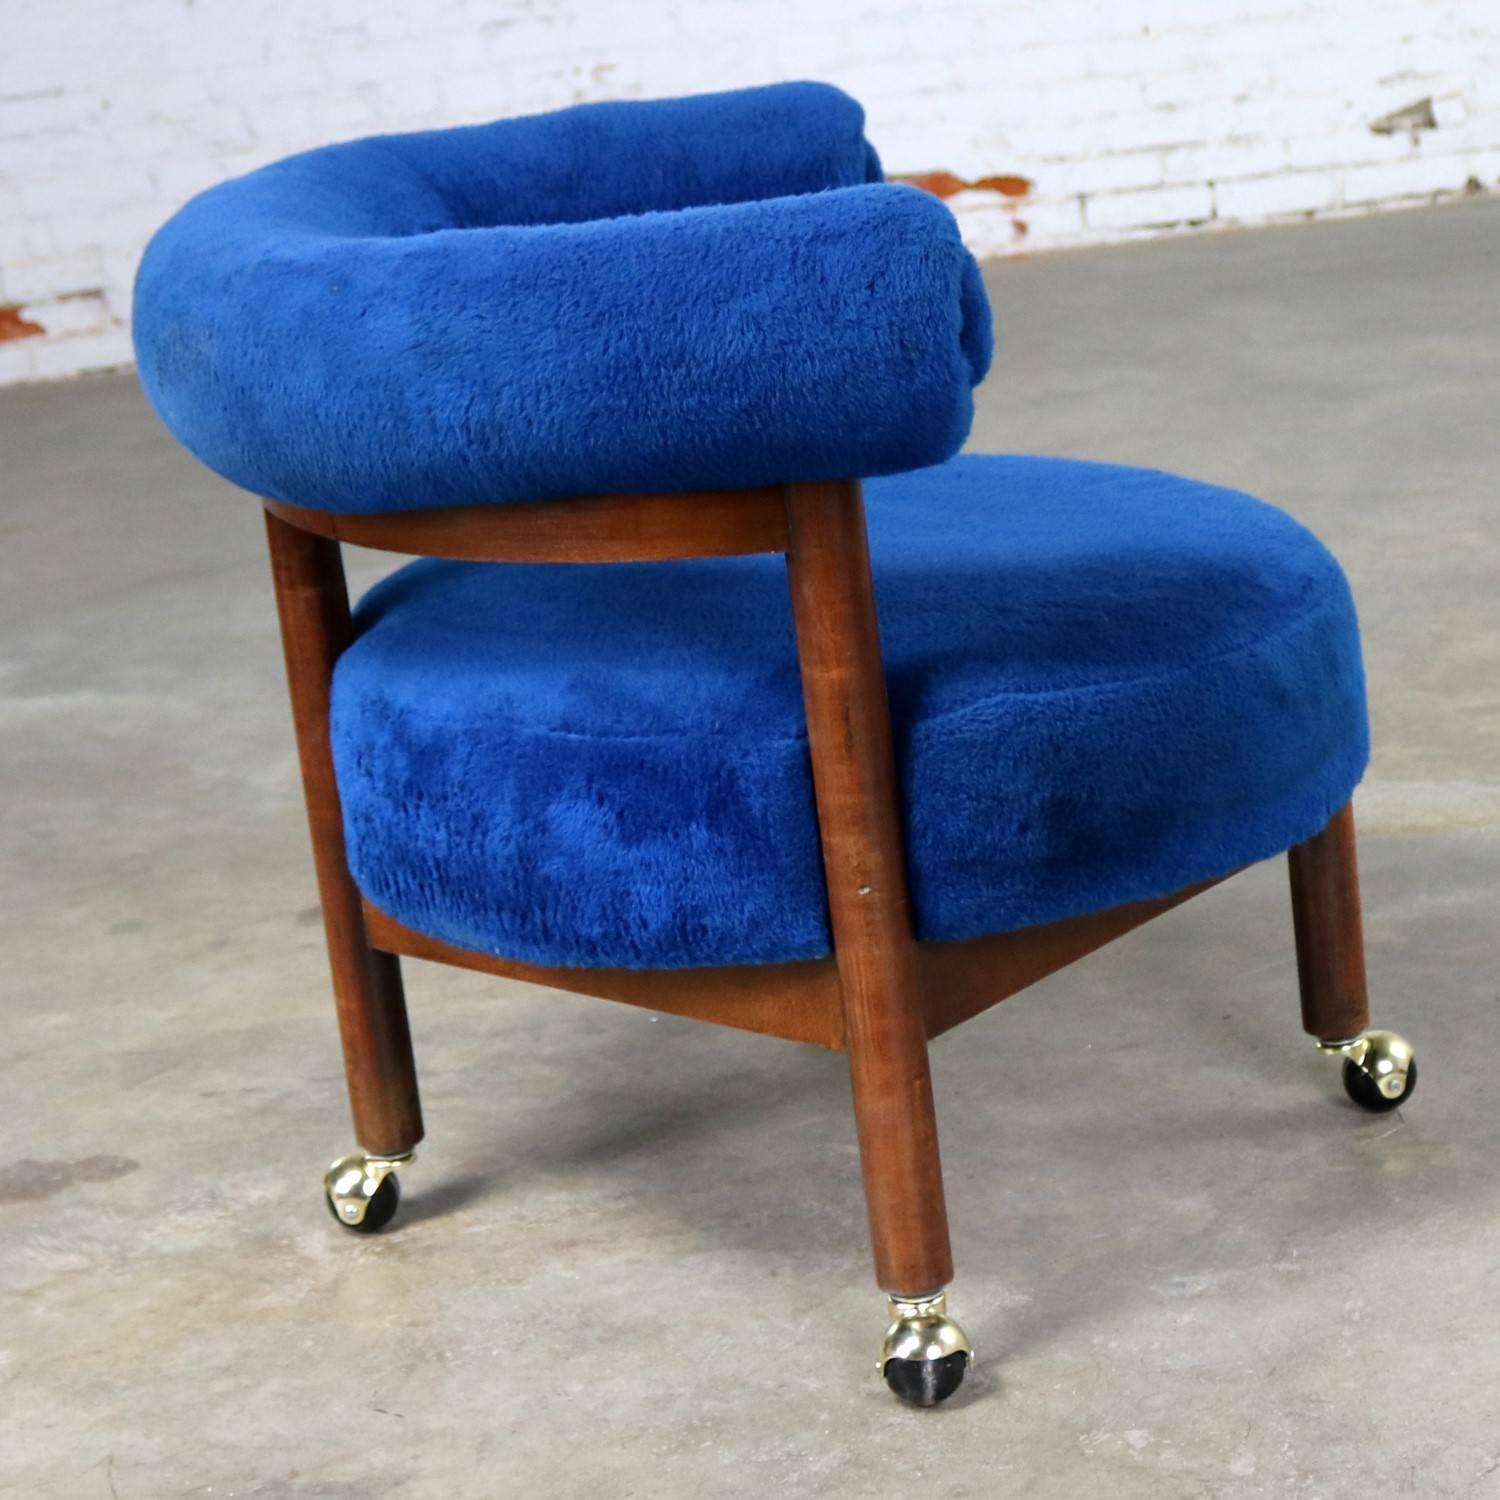 Mid-Century Modern Royal Blue Round Corner Chair with Bolster Back on Casters Midcentury